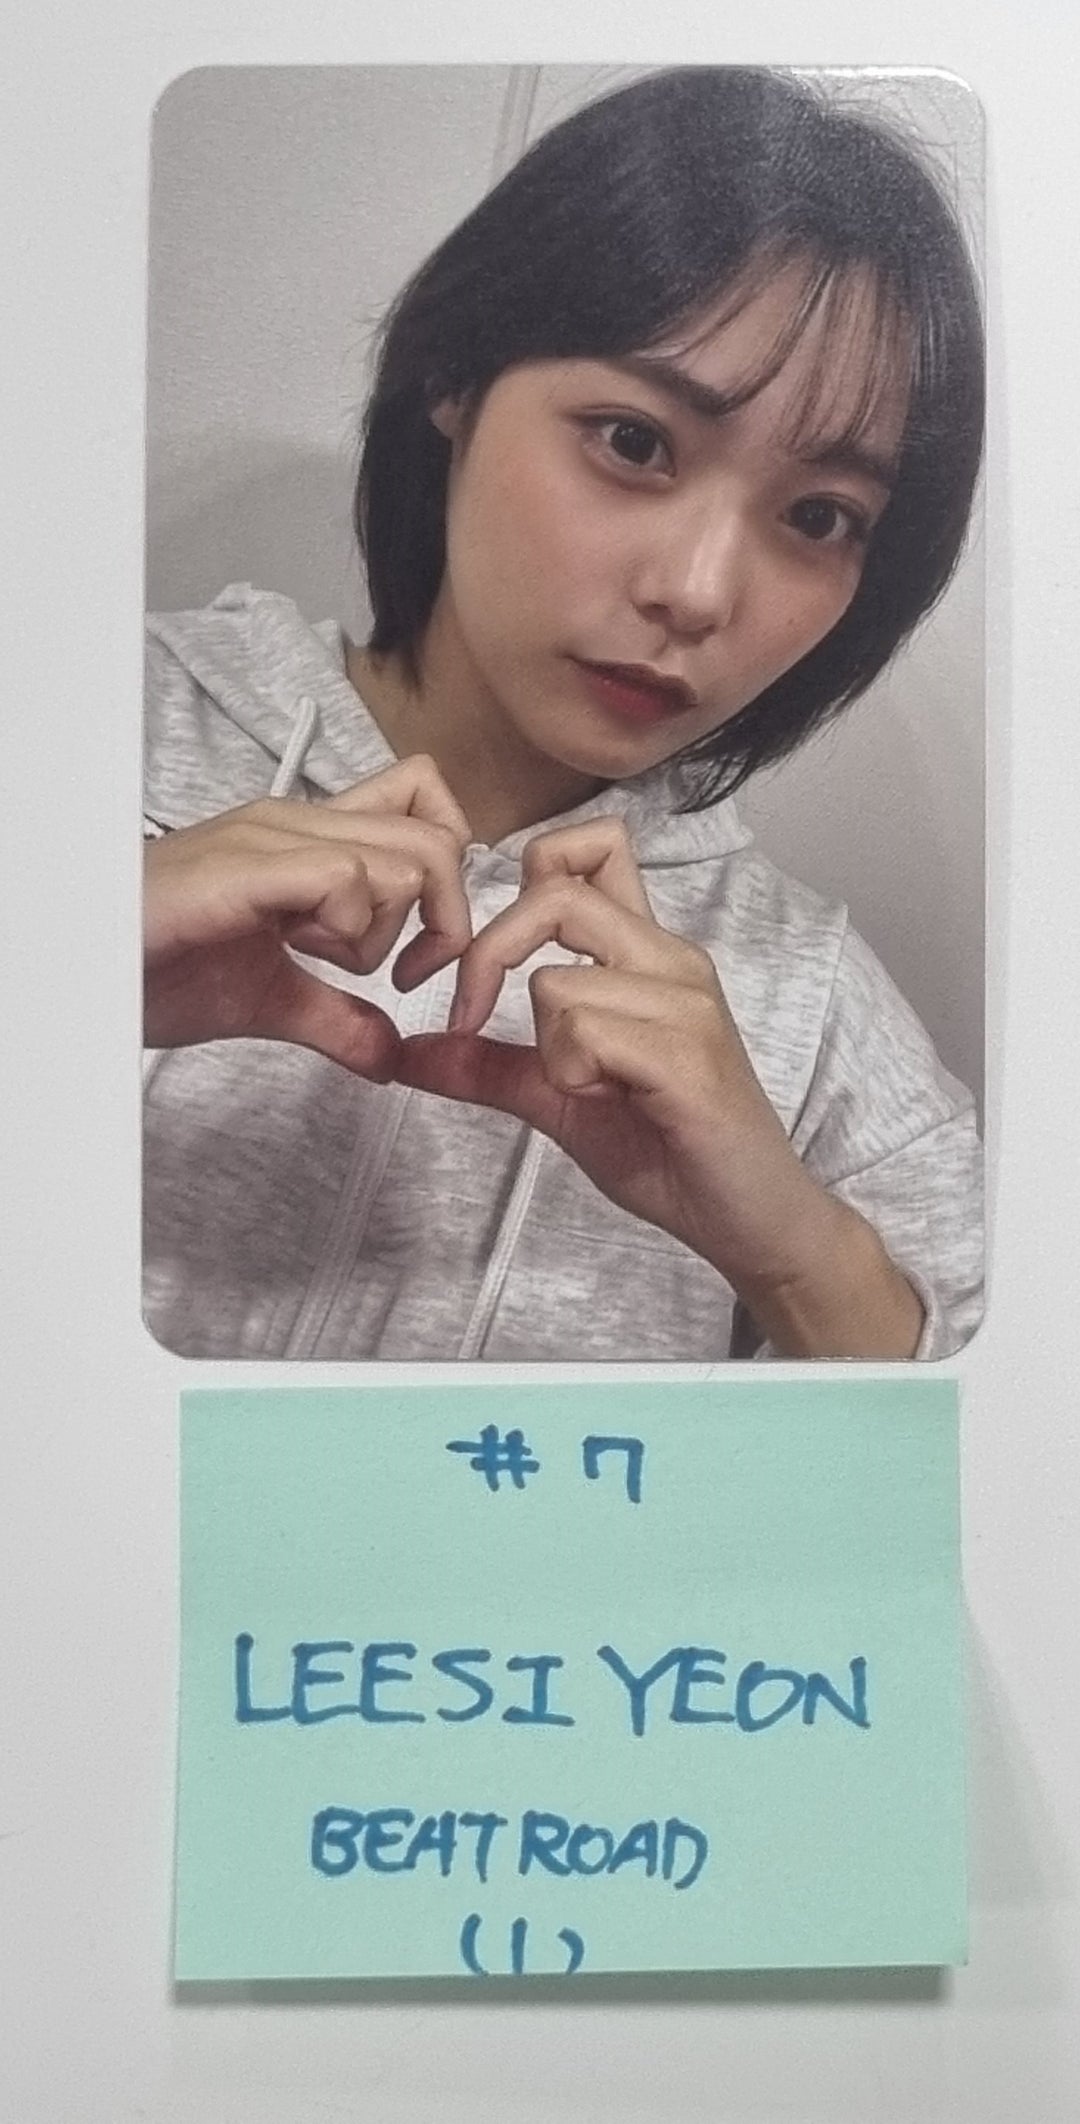 QWER "Harmony from Discord" - Beatroad Fansign Event Photocard [23.12.12]